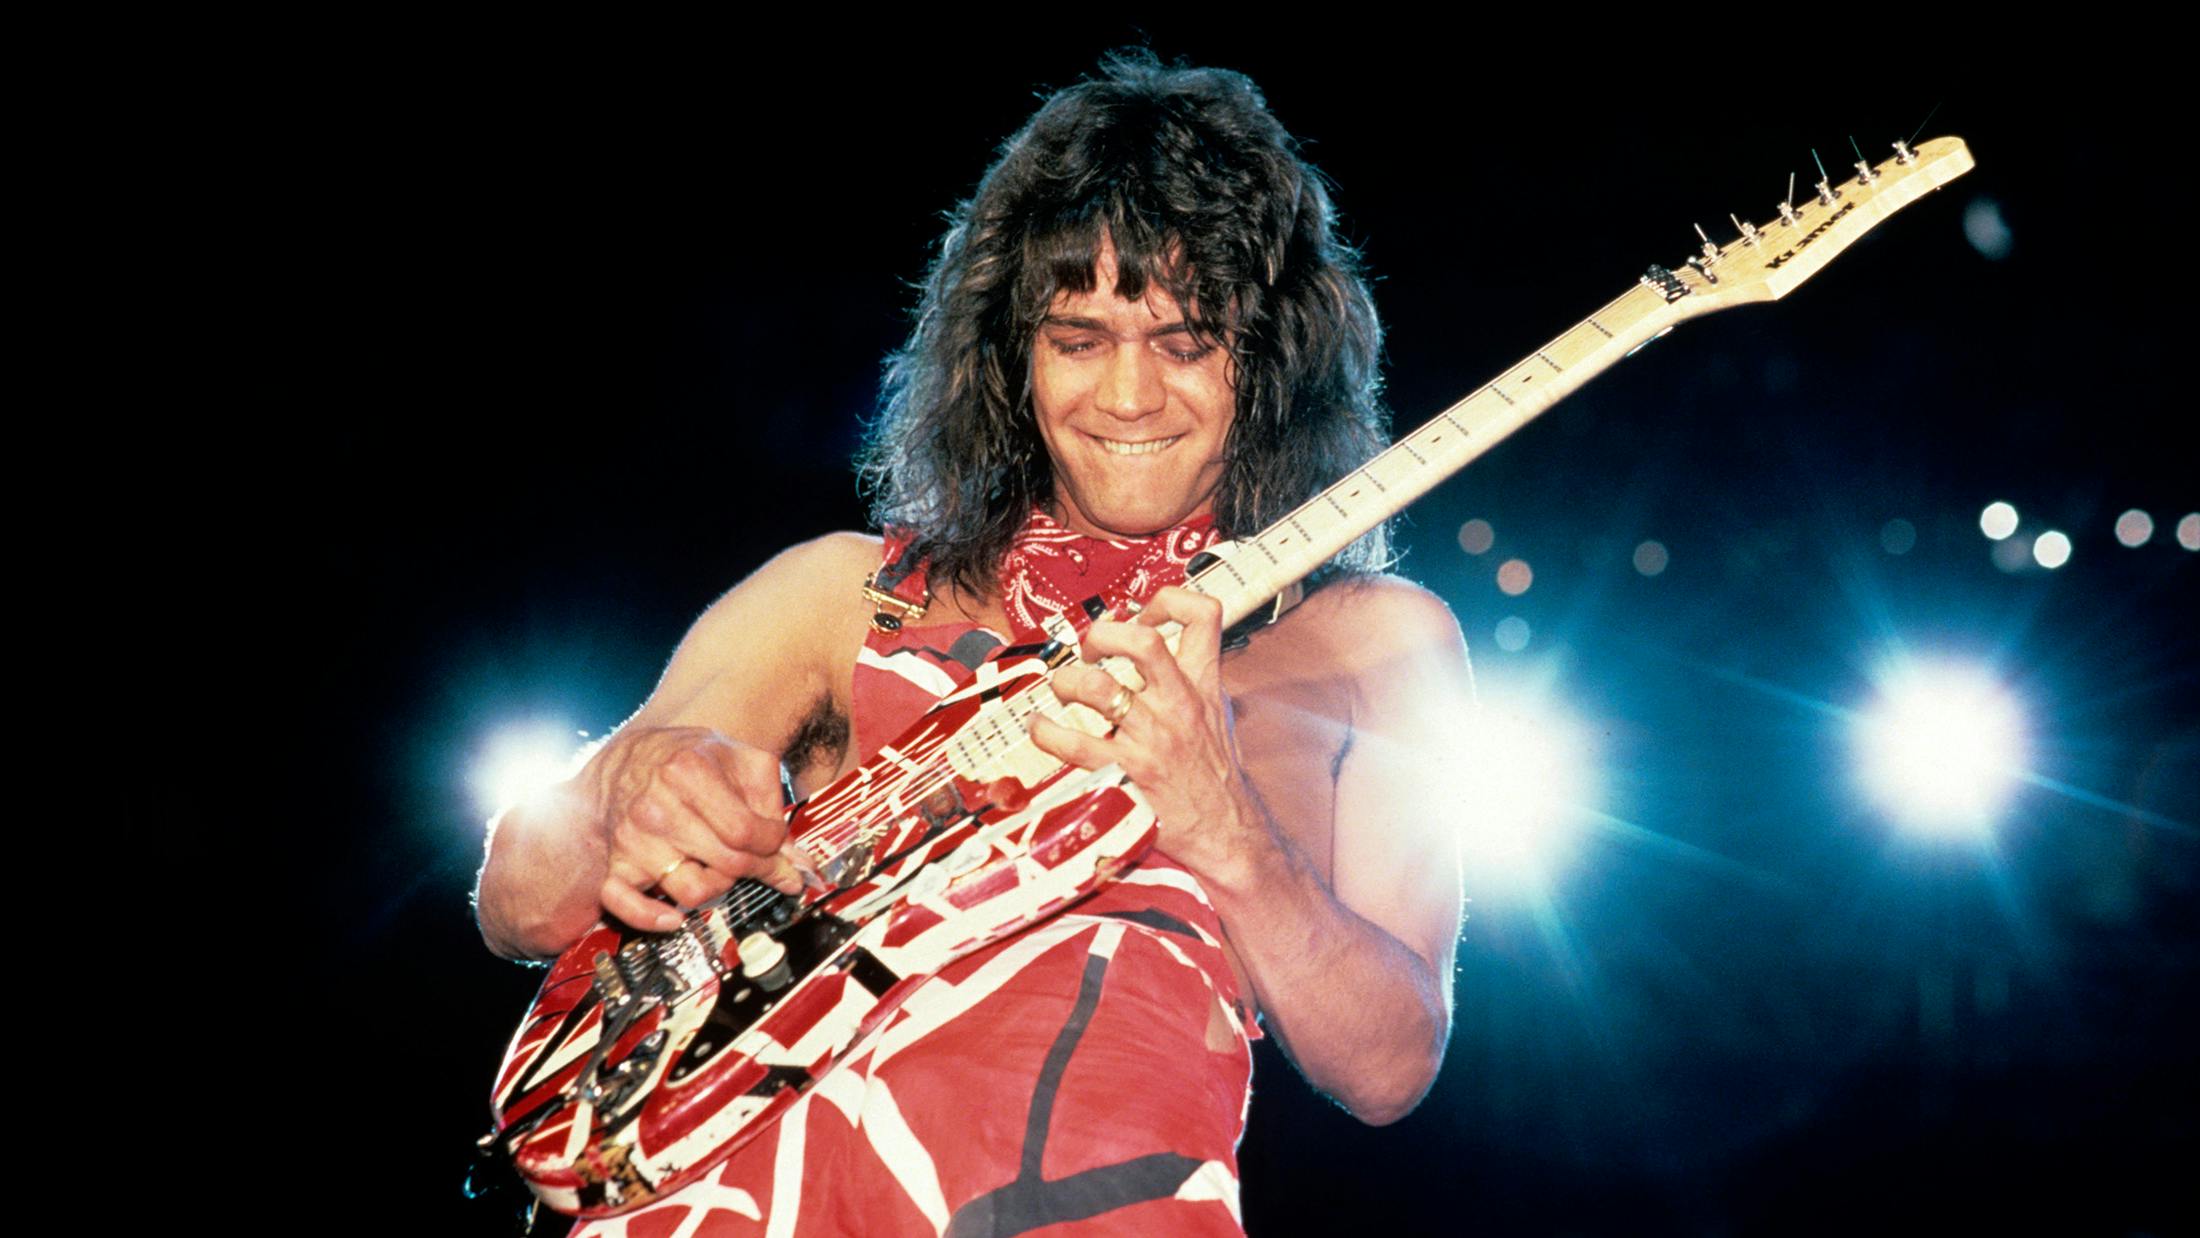 "The Greatest Of All Time Has Left The Building": Rock Pays Tribute To Eddie Van Halen